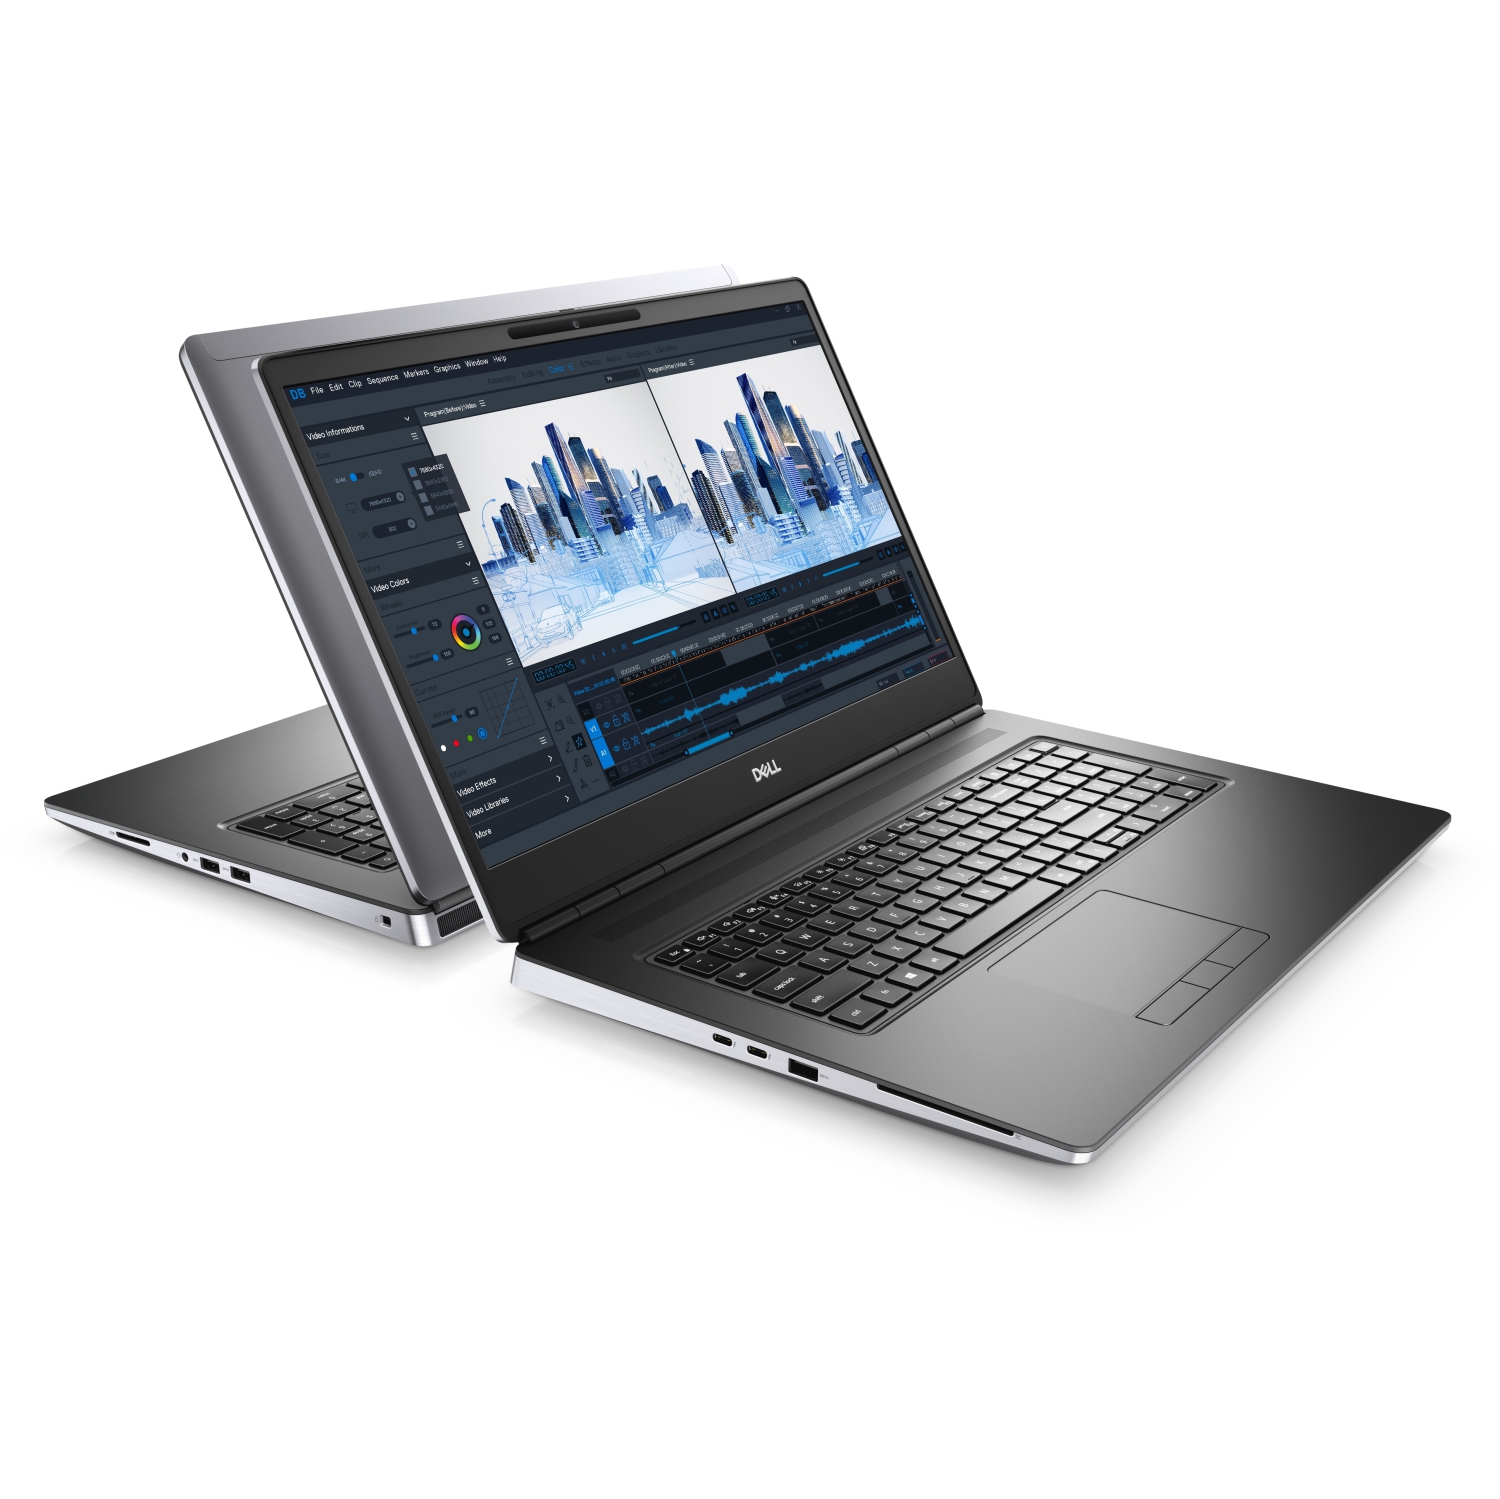 Refurbished (Excellent) - Dell Precision 7000 7760 Workstation Laptop (2021), 17.3" FHD, Core i7, 512GB SSD, 64GB RAM, RTX A4000, 4.8 GHz, 11th Gen CPU Certified